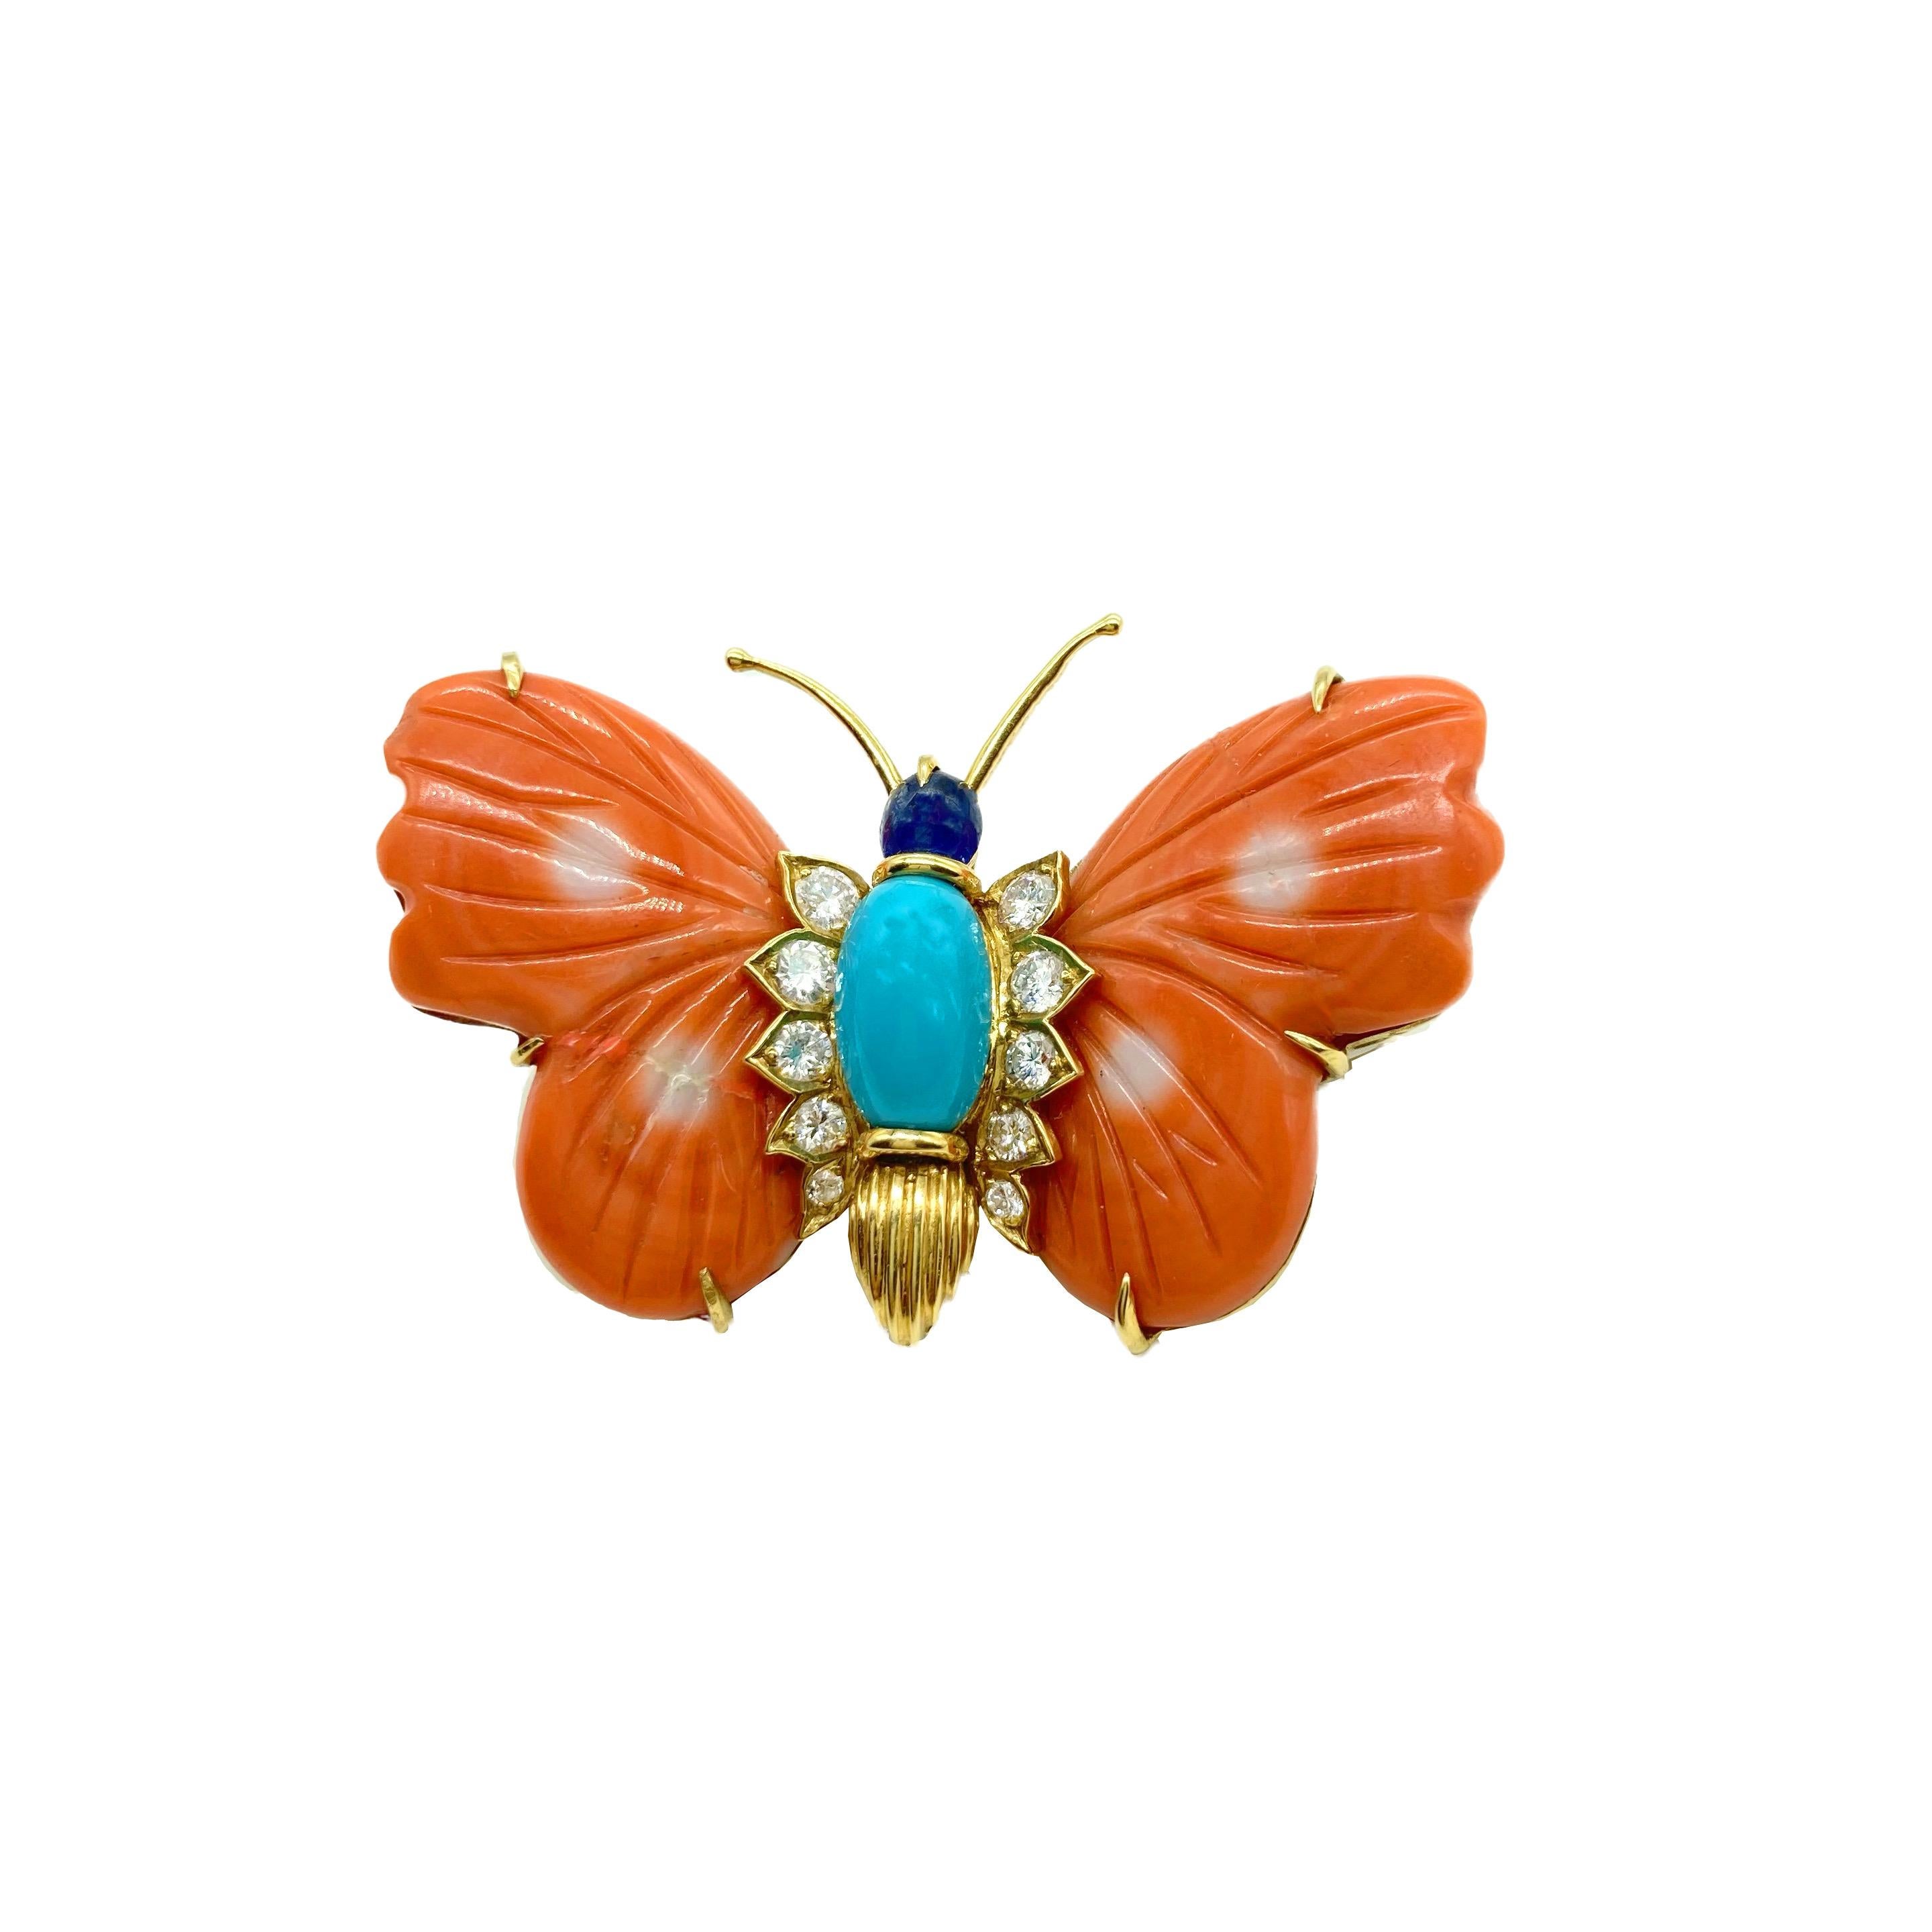 A beautiful vintage Cartier butterfly brooch in 18 karat yellow gold with diamonds, coral, turquoise and cabochon blue sapphire. 